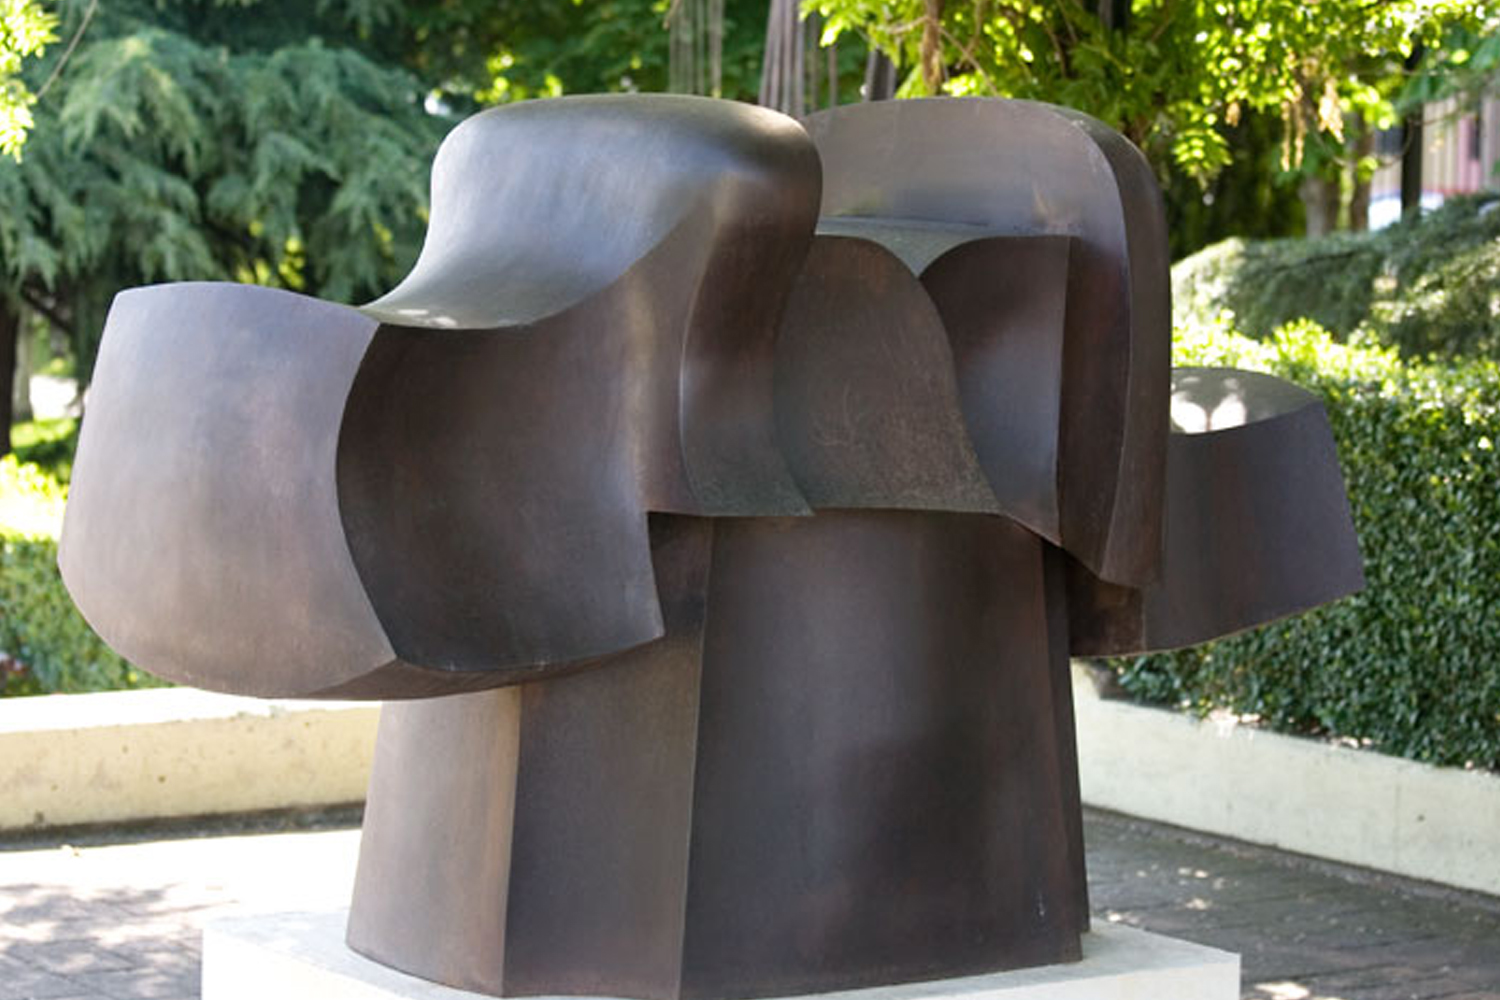 The best contemporary outdoor sculpture